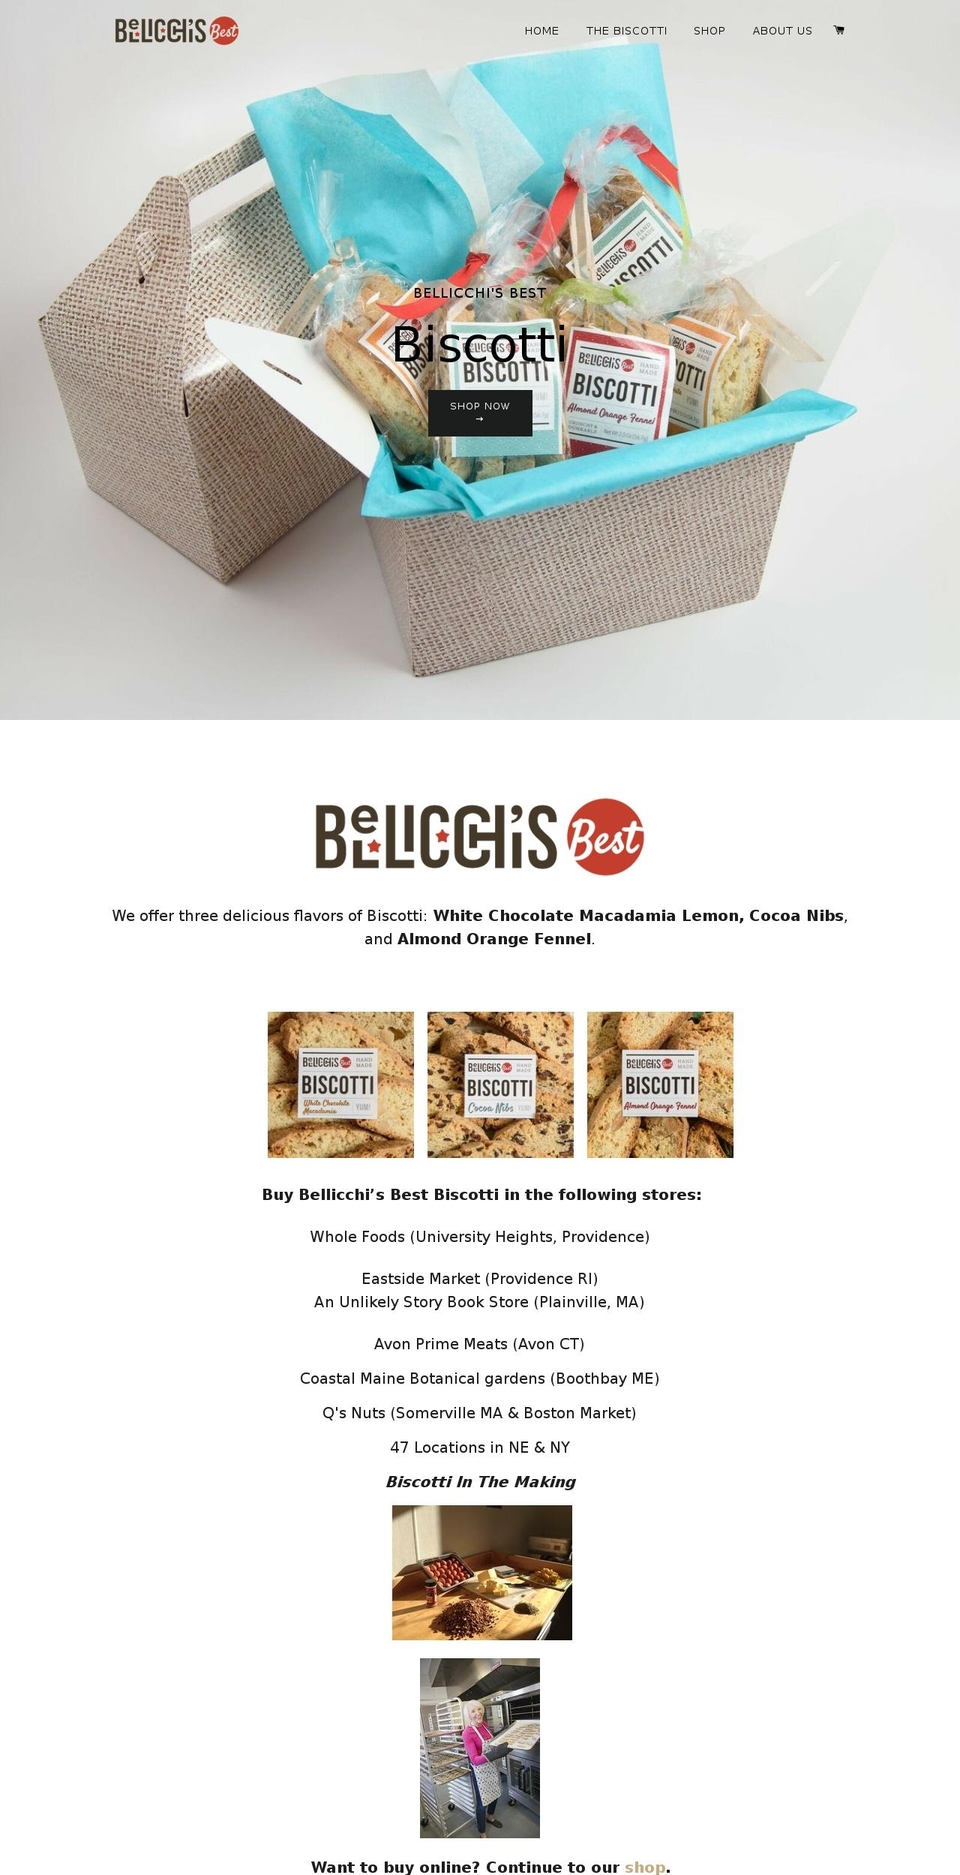 Brooklyn Shopify theme site example bellicchis.com